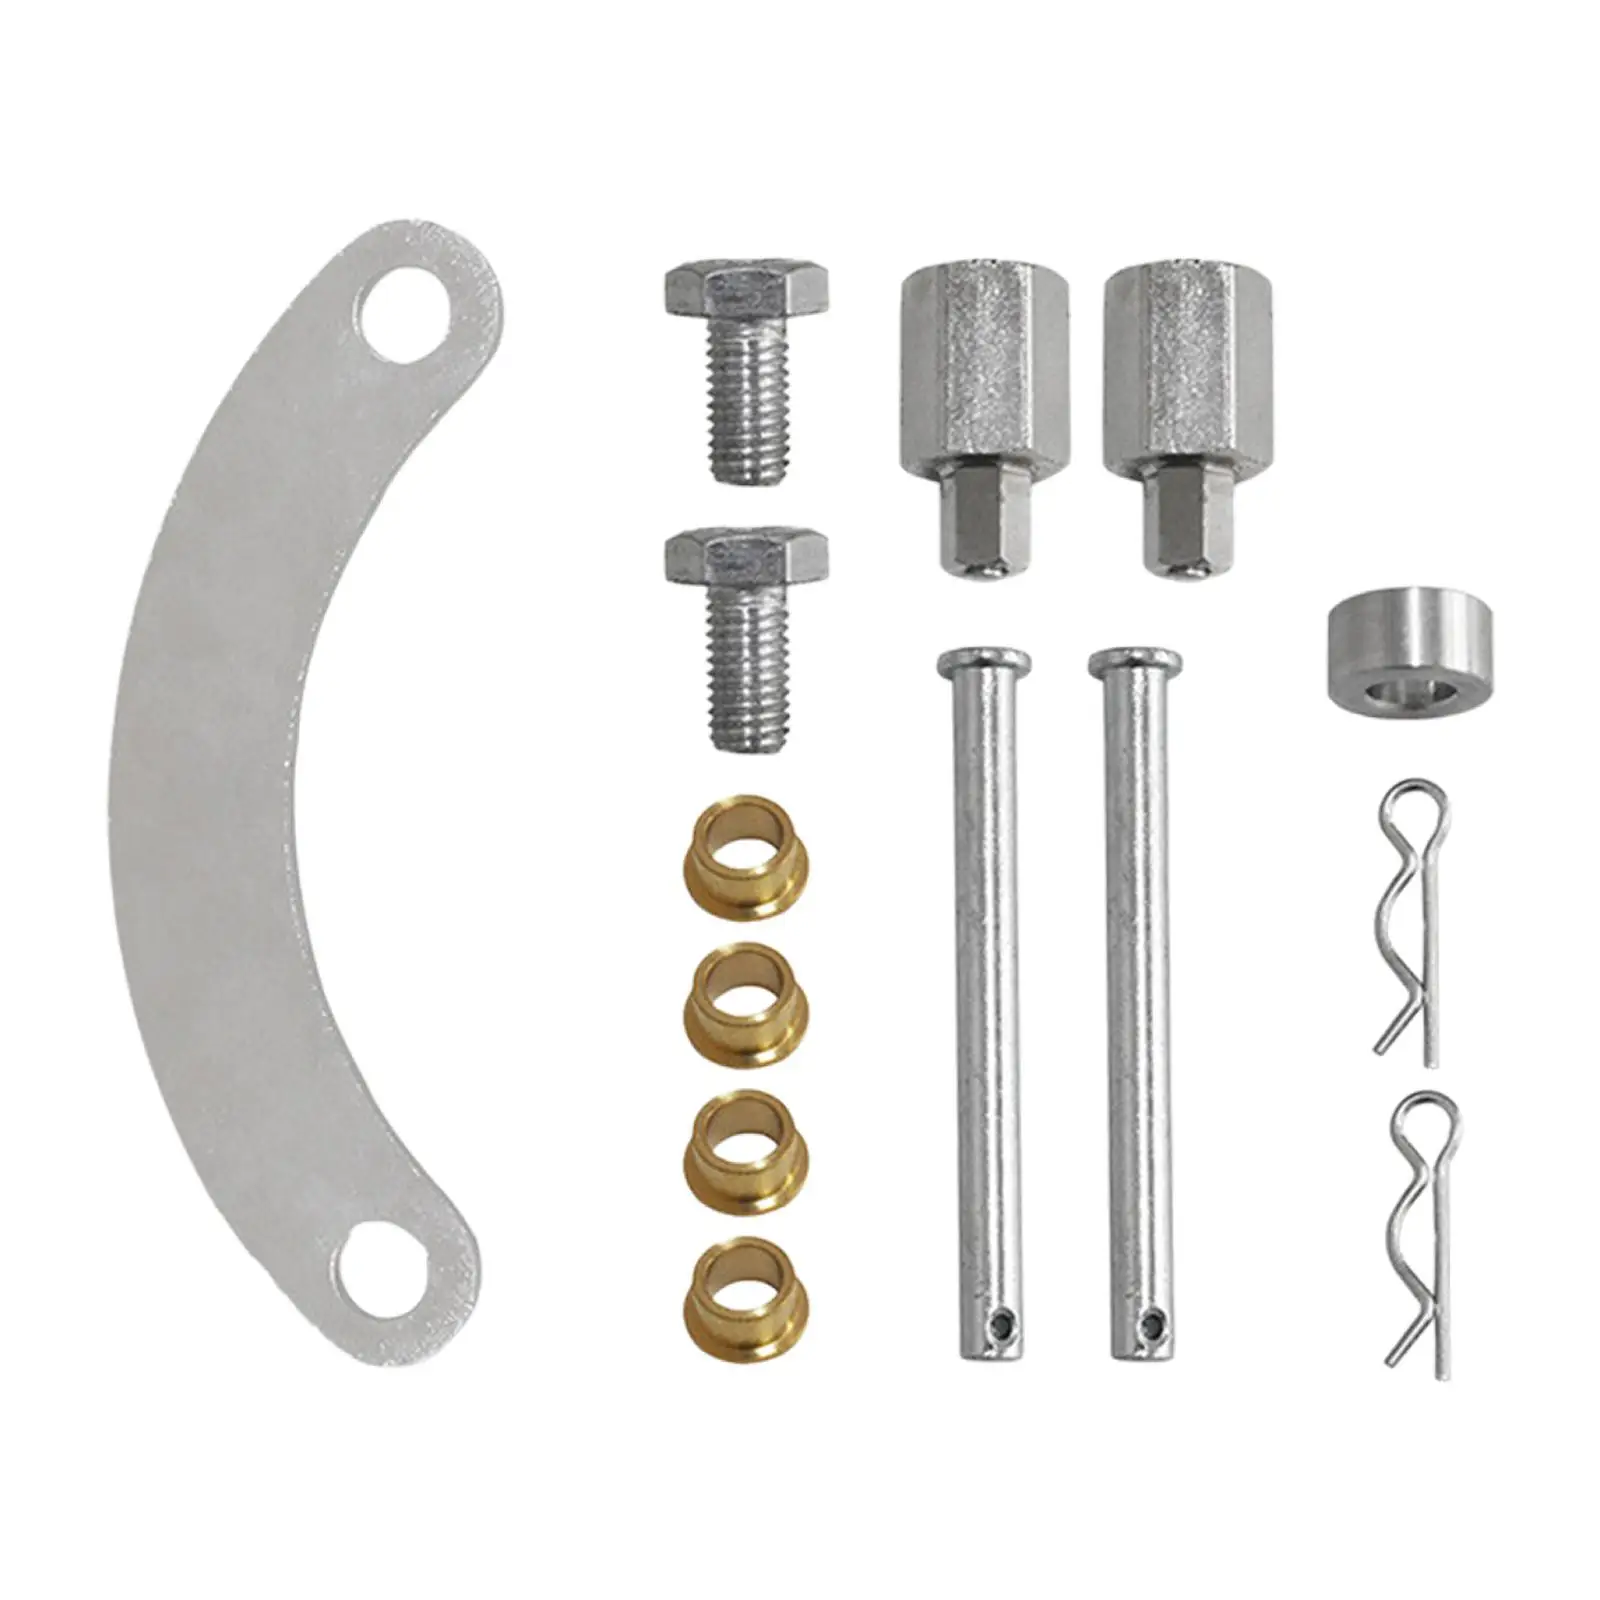 cam Gear Lock set Accessory for Dohc Mounting Hardware Repair Parts